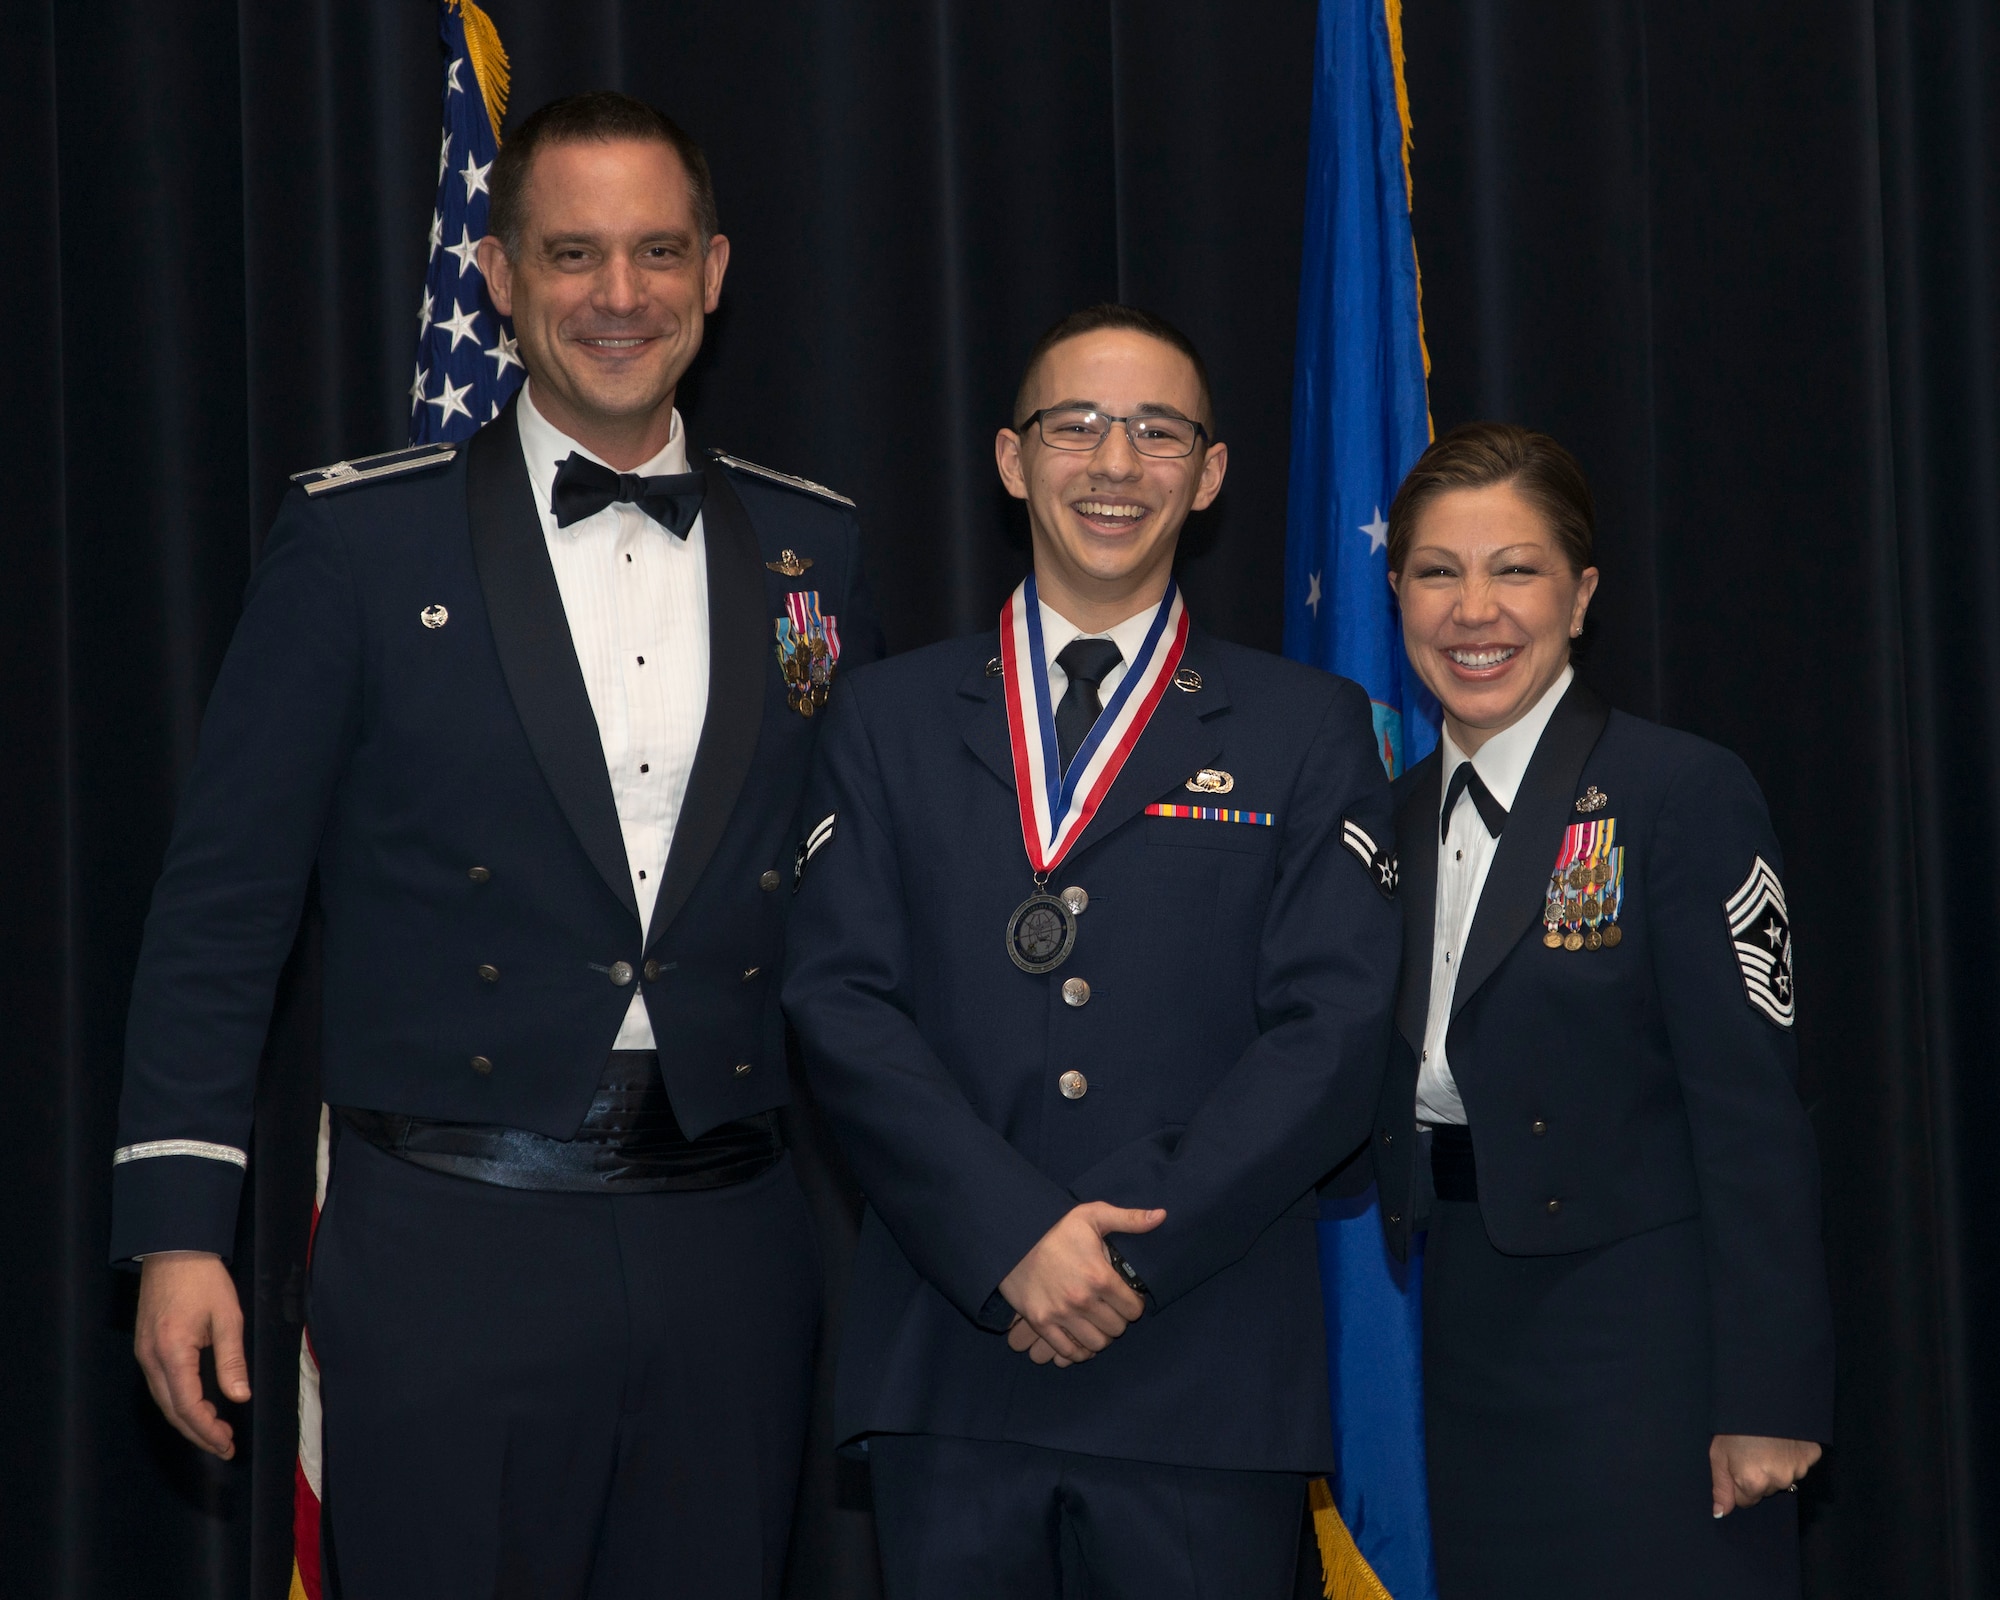 Col. Ethan C. Griffin, 436th Airlift Wing commander,  and Chief Master Sgt. Sarah Sparks, 436th AW command chief,  poses with Airman 1st Class Justin Schindlbeck, 436th Comptroller Squadron financial services technician, at the 2016 436th AW Annual Awards Ceremony Feb. 3, 2017, at the Rollins Center inside of Dover Downs, Dover, Del. Before the start of the event, nominees in each of the 14 categories were called to the stage to be recognized for their hard work. Individual categories nominees received medallions. (U.S. Air Force photo by Staff Sgt. Jared Duhon)